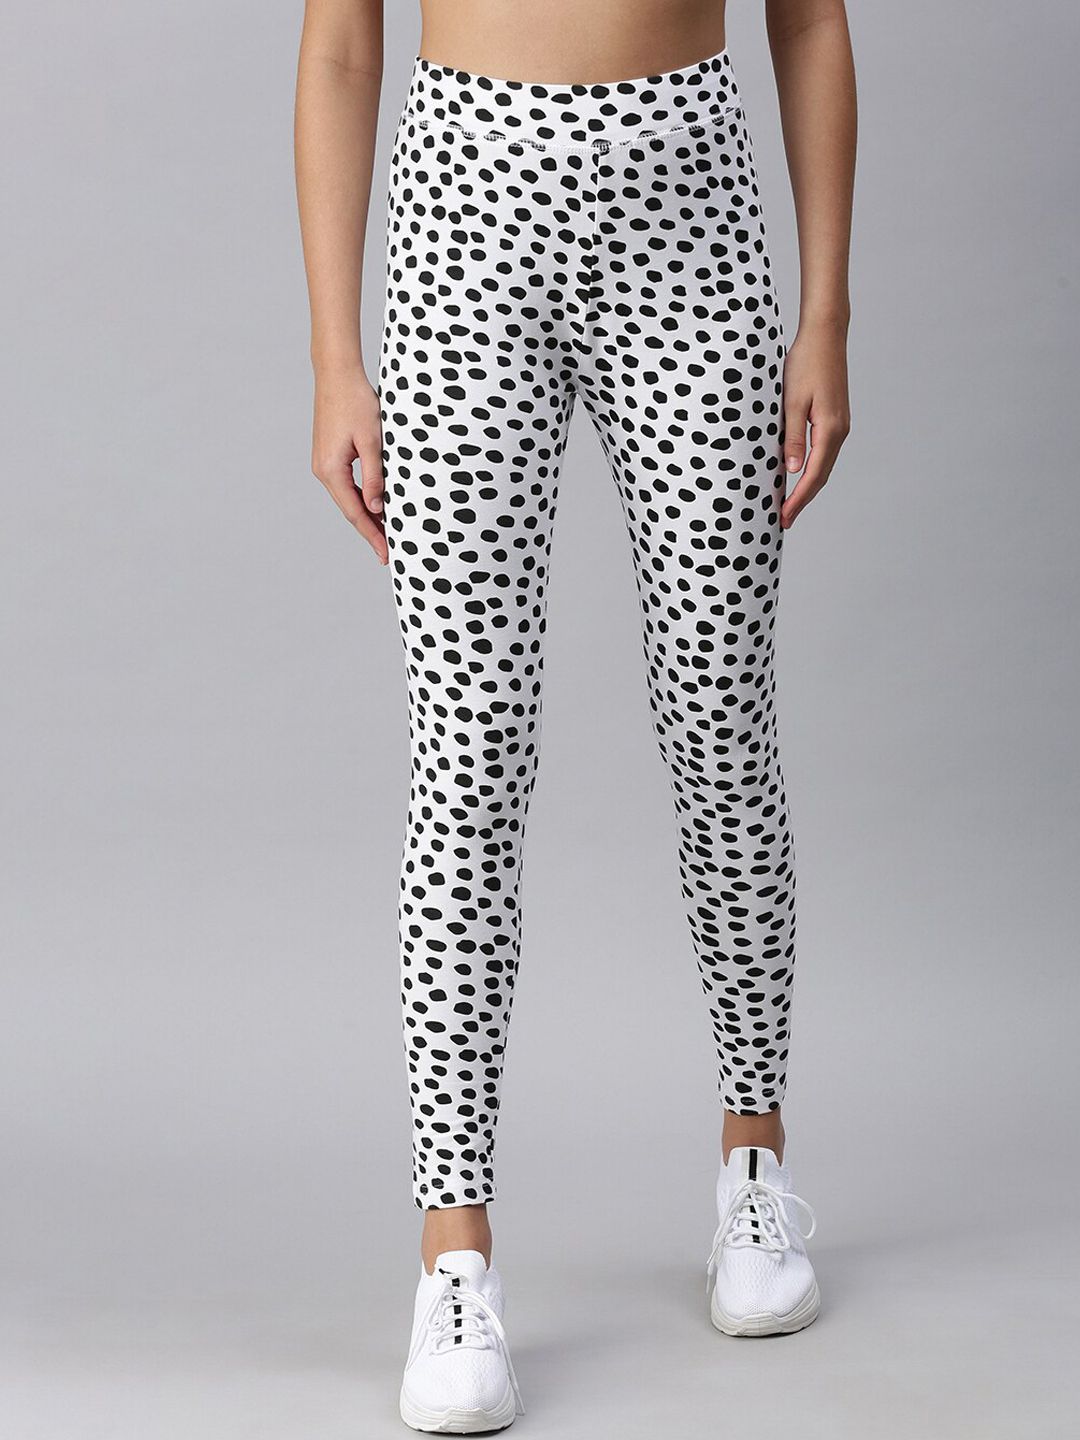 De Moza Women White Printed Ankle Length Tights Price in India